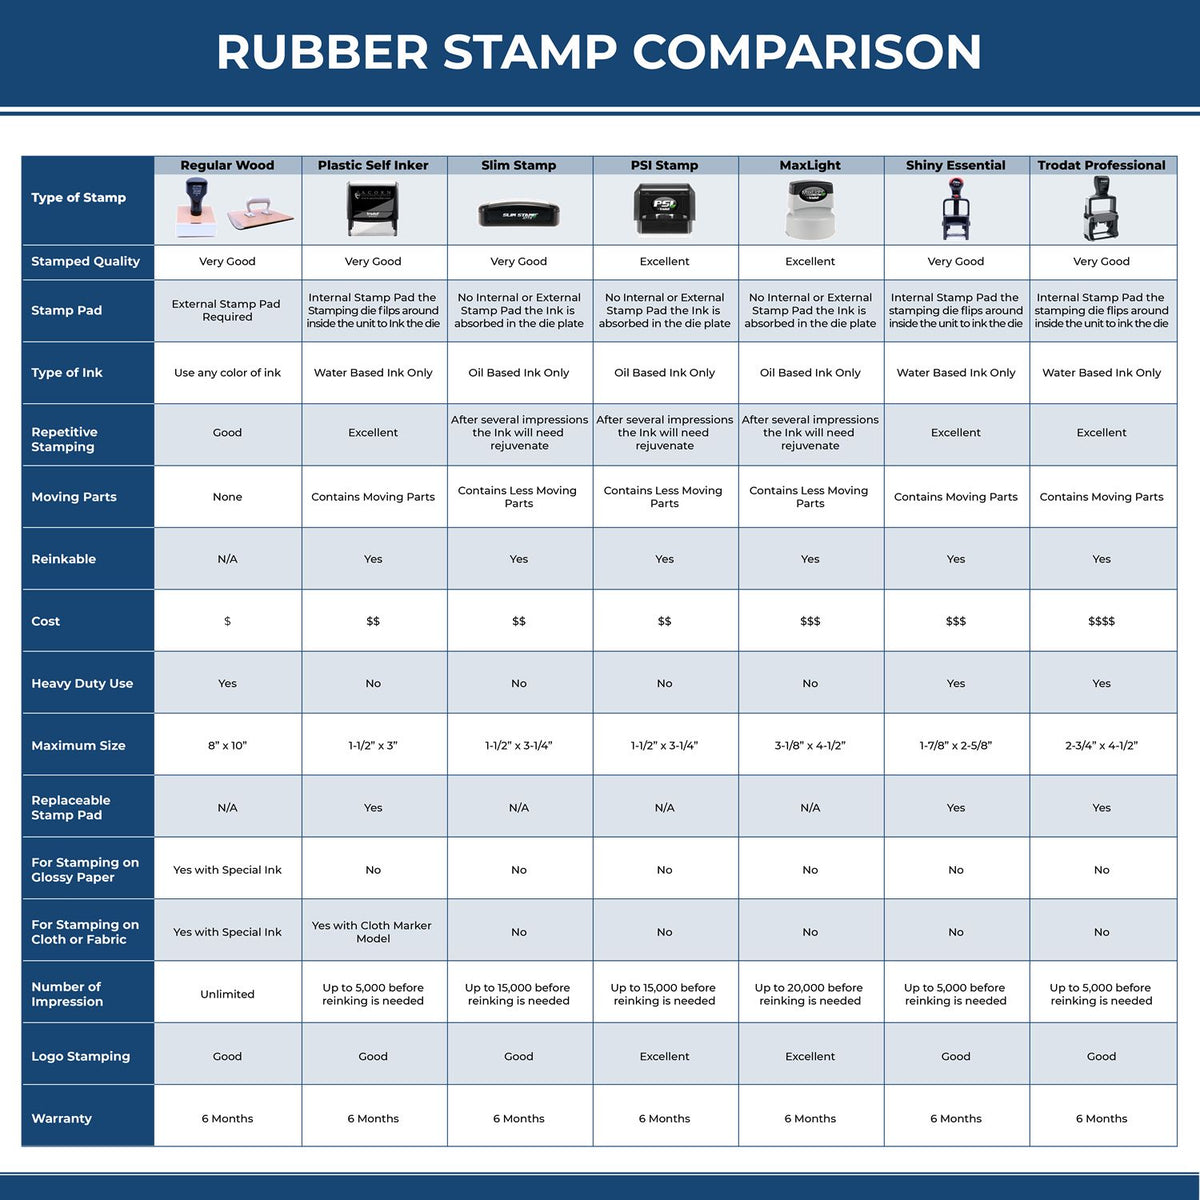 A comparison chart for the different types of mount models available for the South Carolina Landscape Architectural Seal Stamp.